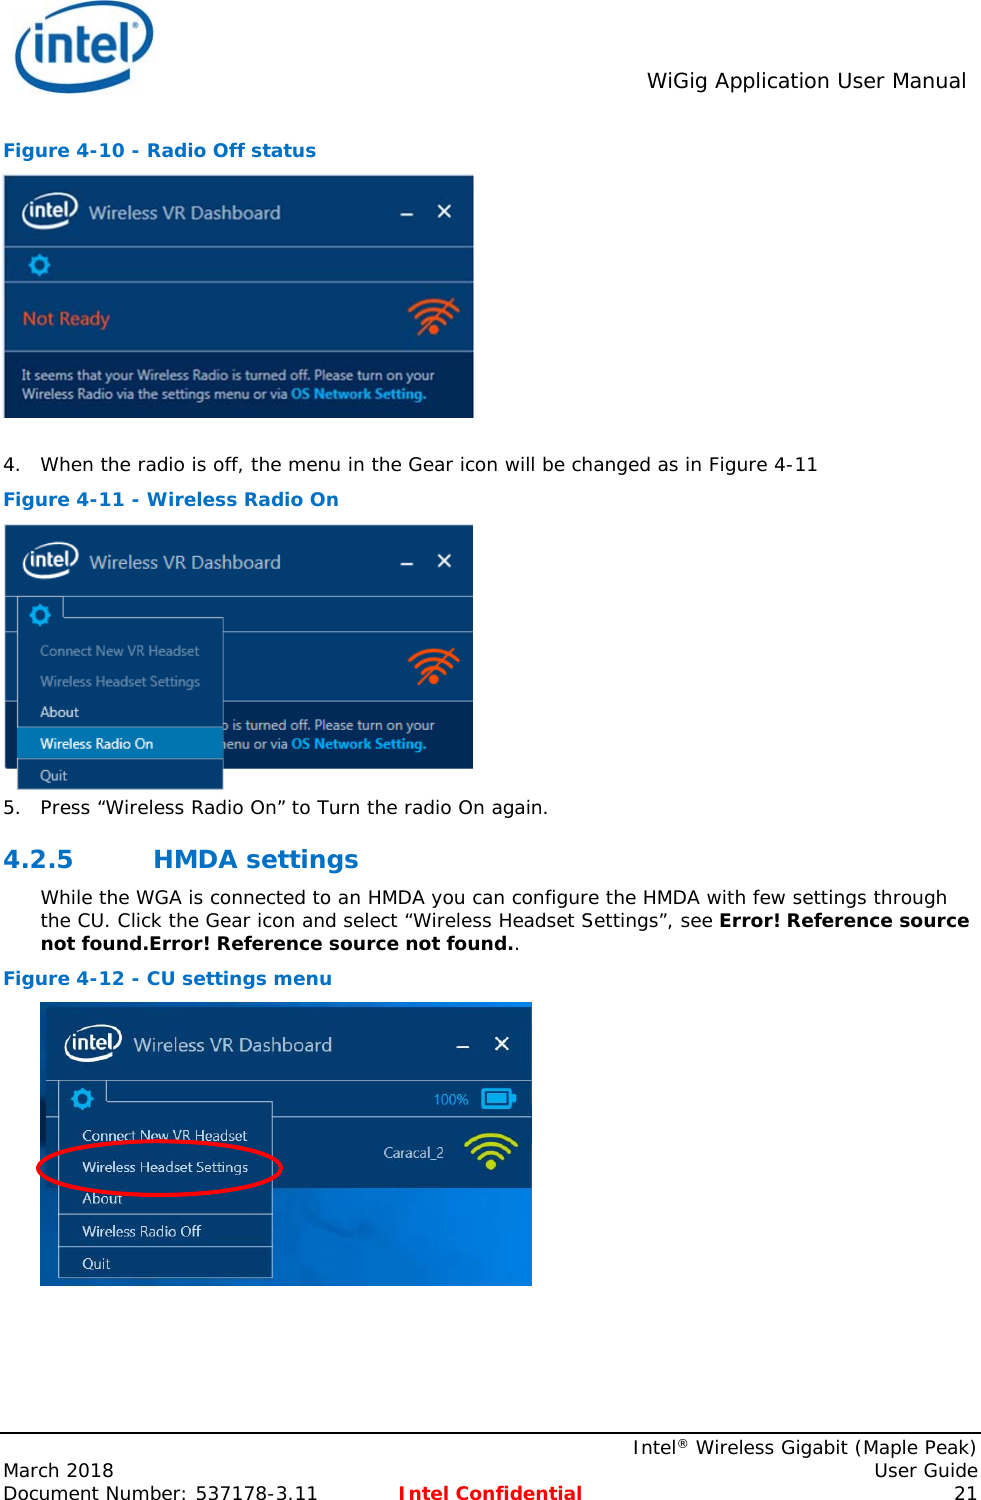  WiGig Application User Manual    Intel® Wireless Gigabit (Maple Peak) March 2018    User Guide Document Number: 537178-3.11  Intel Confidential 21 Figure 4-10 - Radio Off status   4. When the radio is off, the menu in the Gear icon will be changed as in Figure 4-11 Figure 4-11 - Wireless Radio On  5. Press “Wireless Radio On” to Turn the radio On again. 4.2.5 HMDA settings While the WGA is connected to an HMDA you can configure the HMDA with few settings through the CU. Click the Gear icon and select “Wireless Headset Settings”, see Error! Reference source not found.Error! Reference source not found..  Figure 4-12 - CU settings menu  